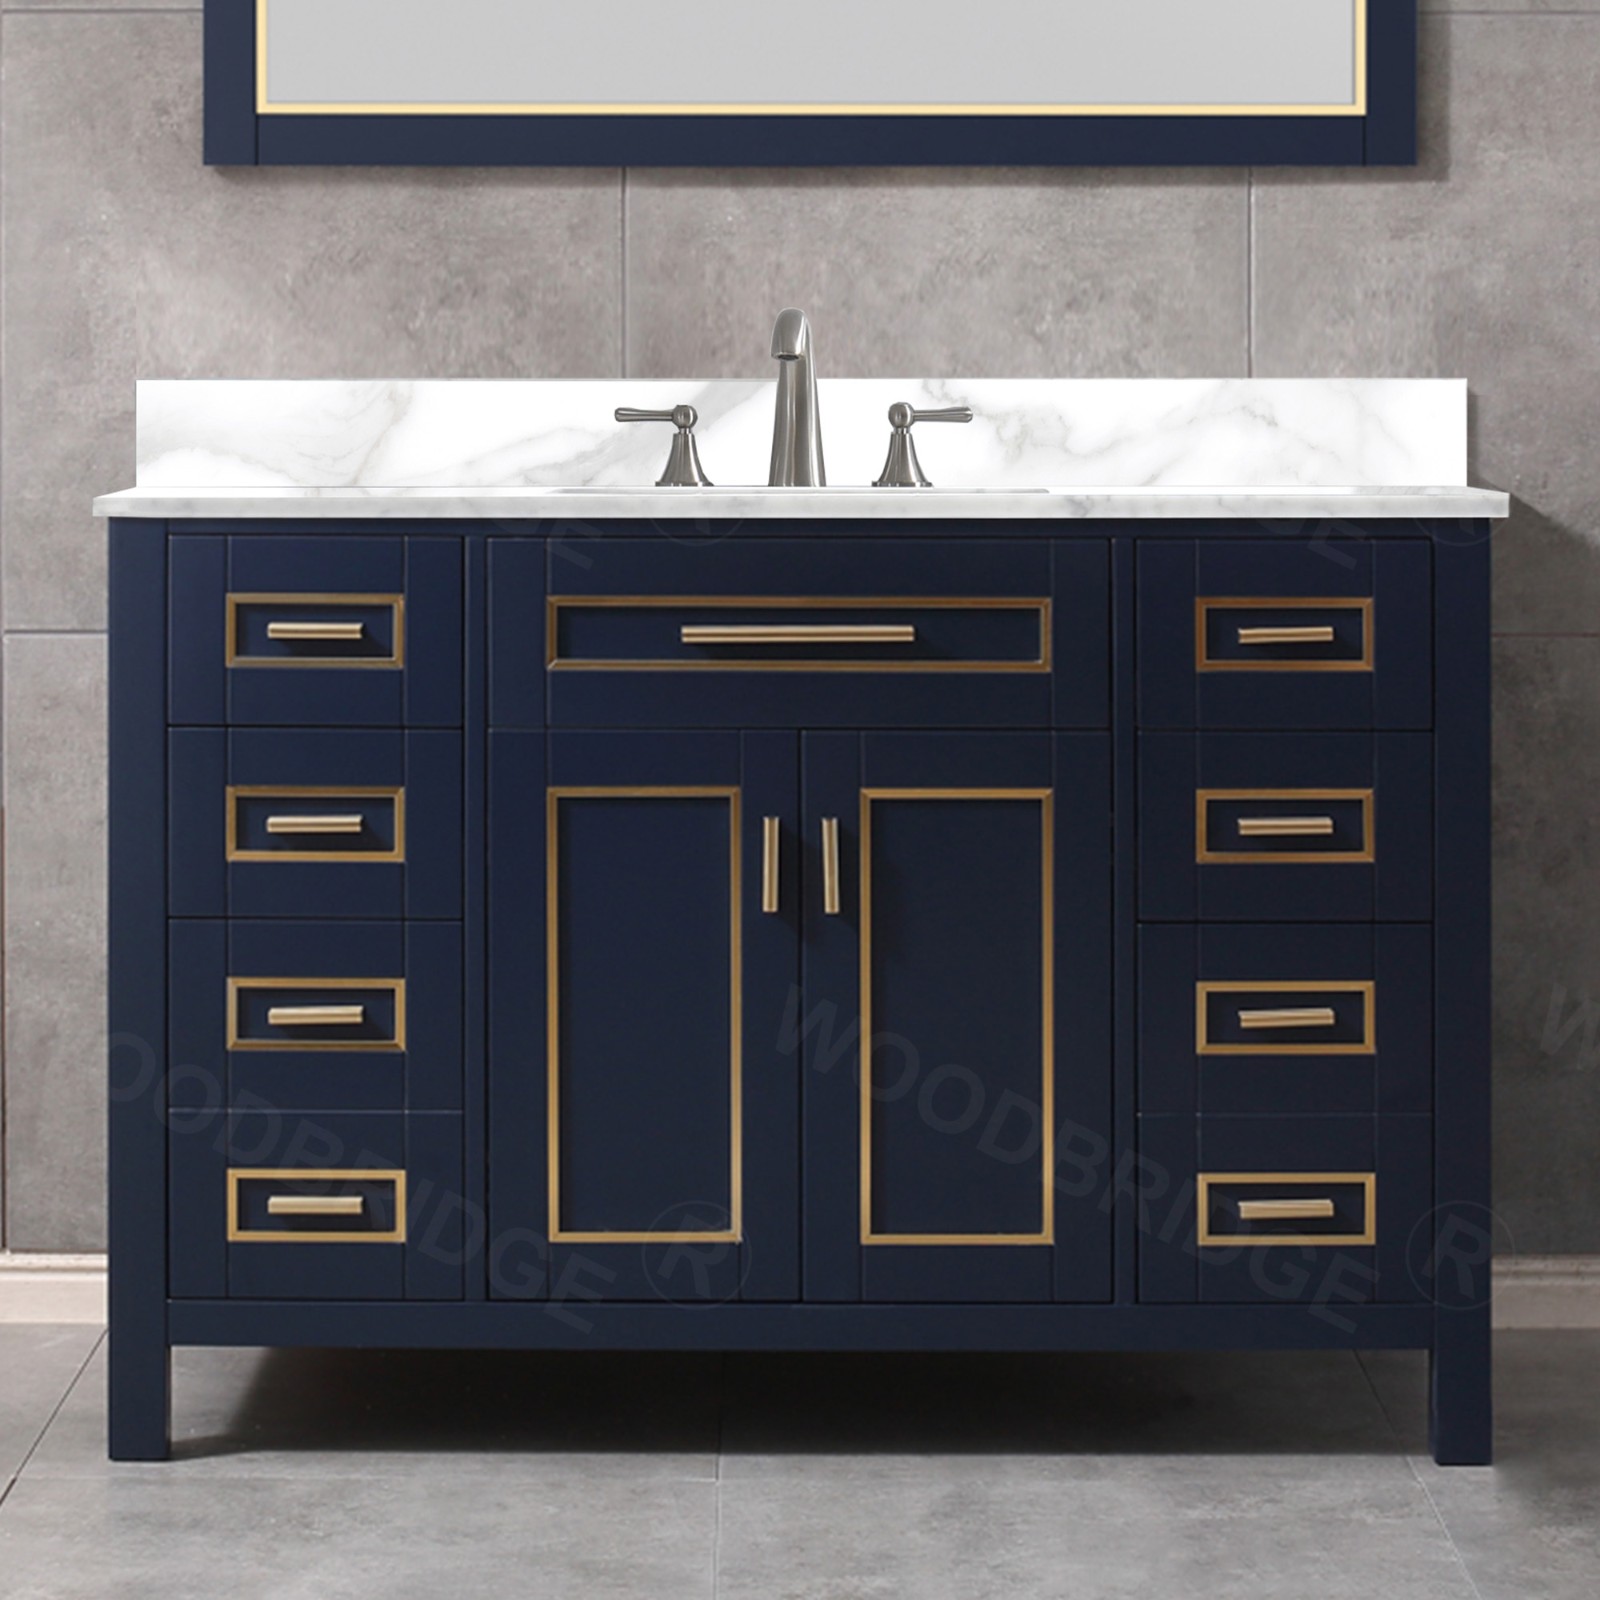  WOODBRIDGE Milan  49” Floor Mounted Single Basin Vanity Set with Solid Wood Cabinet in Navy Blue and Engineered stone composite Vanity Top in Fish Belly White with Pre-installed Undermount Rectangle Bathroom Sink and Pre-Drilled 3-Hole for 8” Widespread F_4713